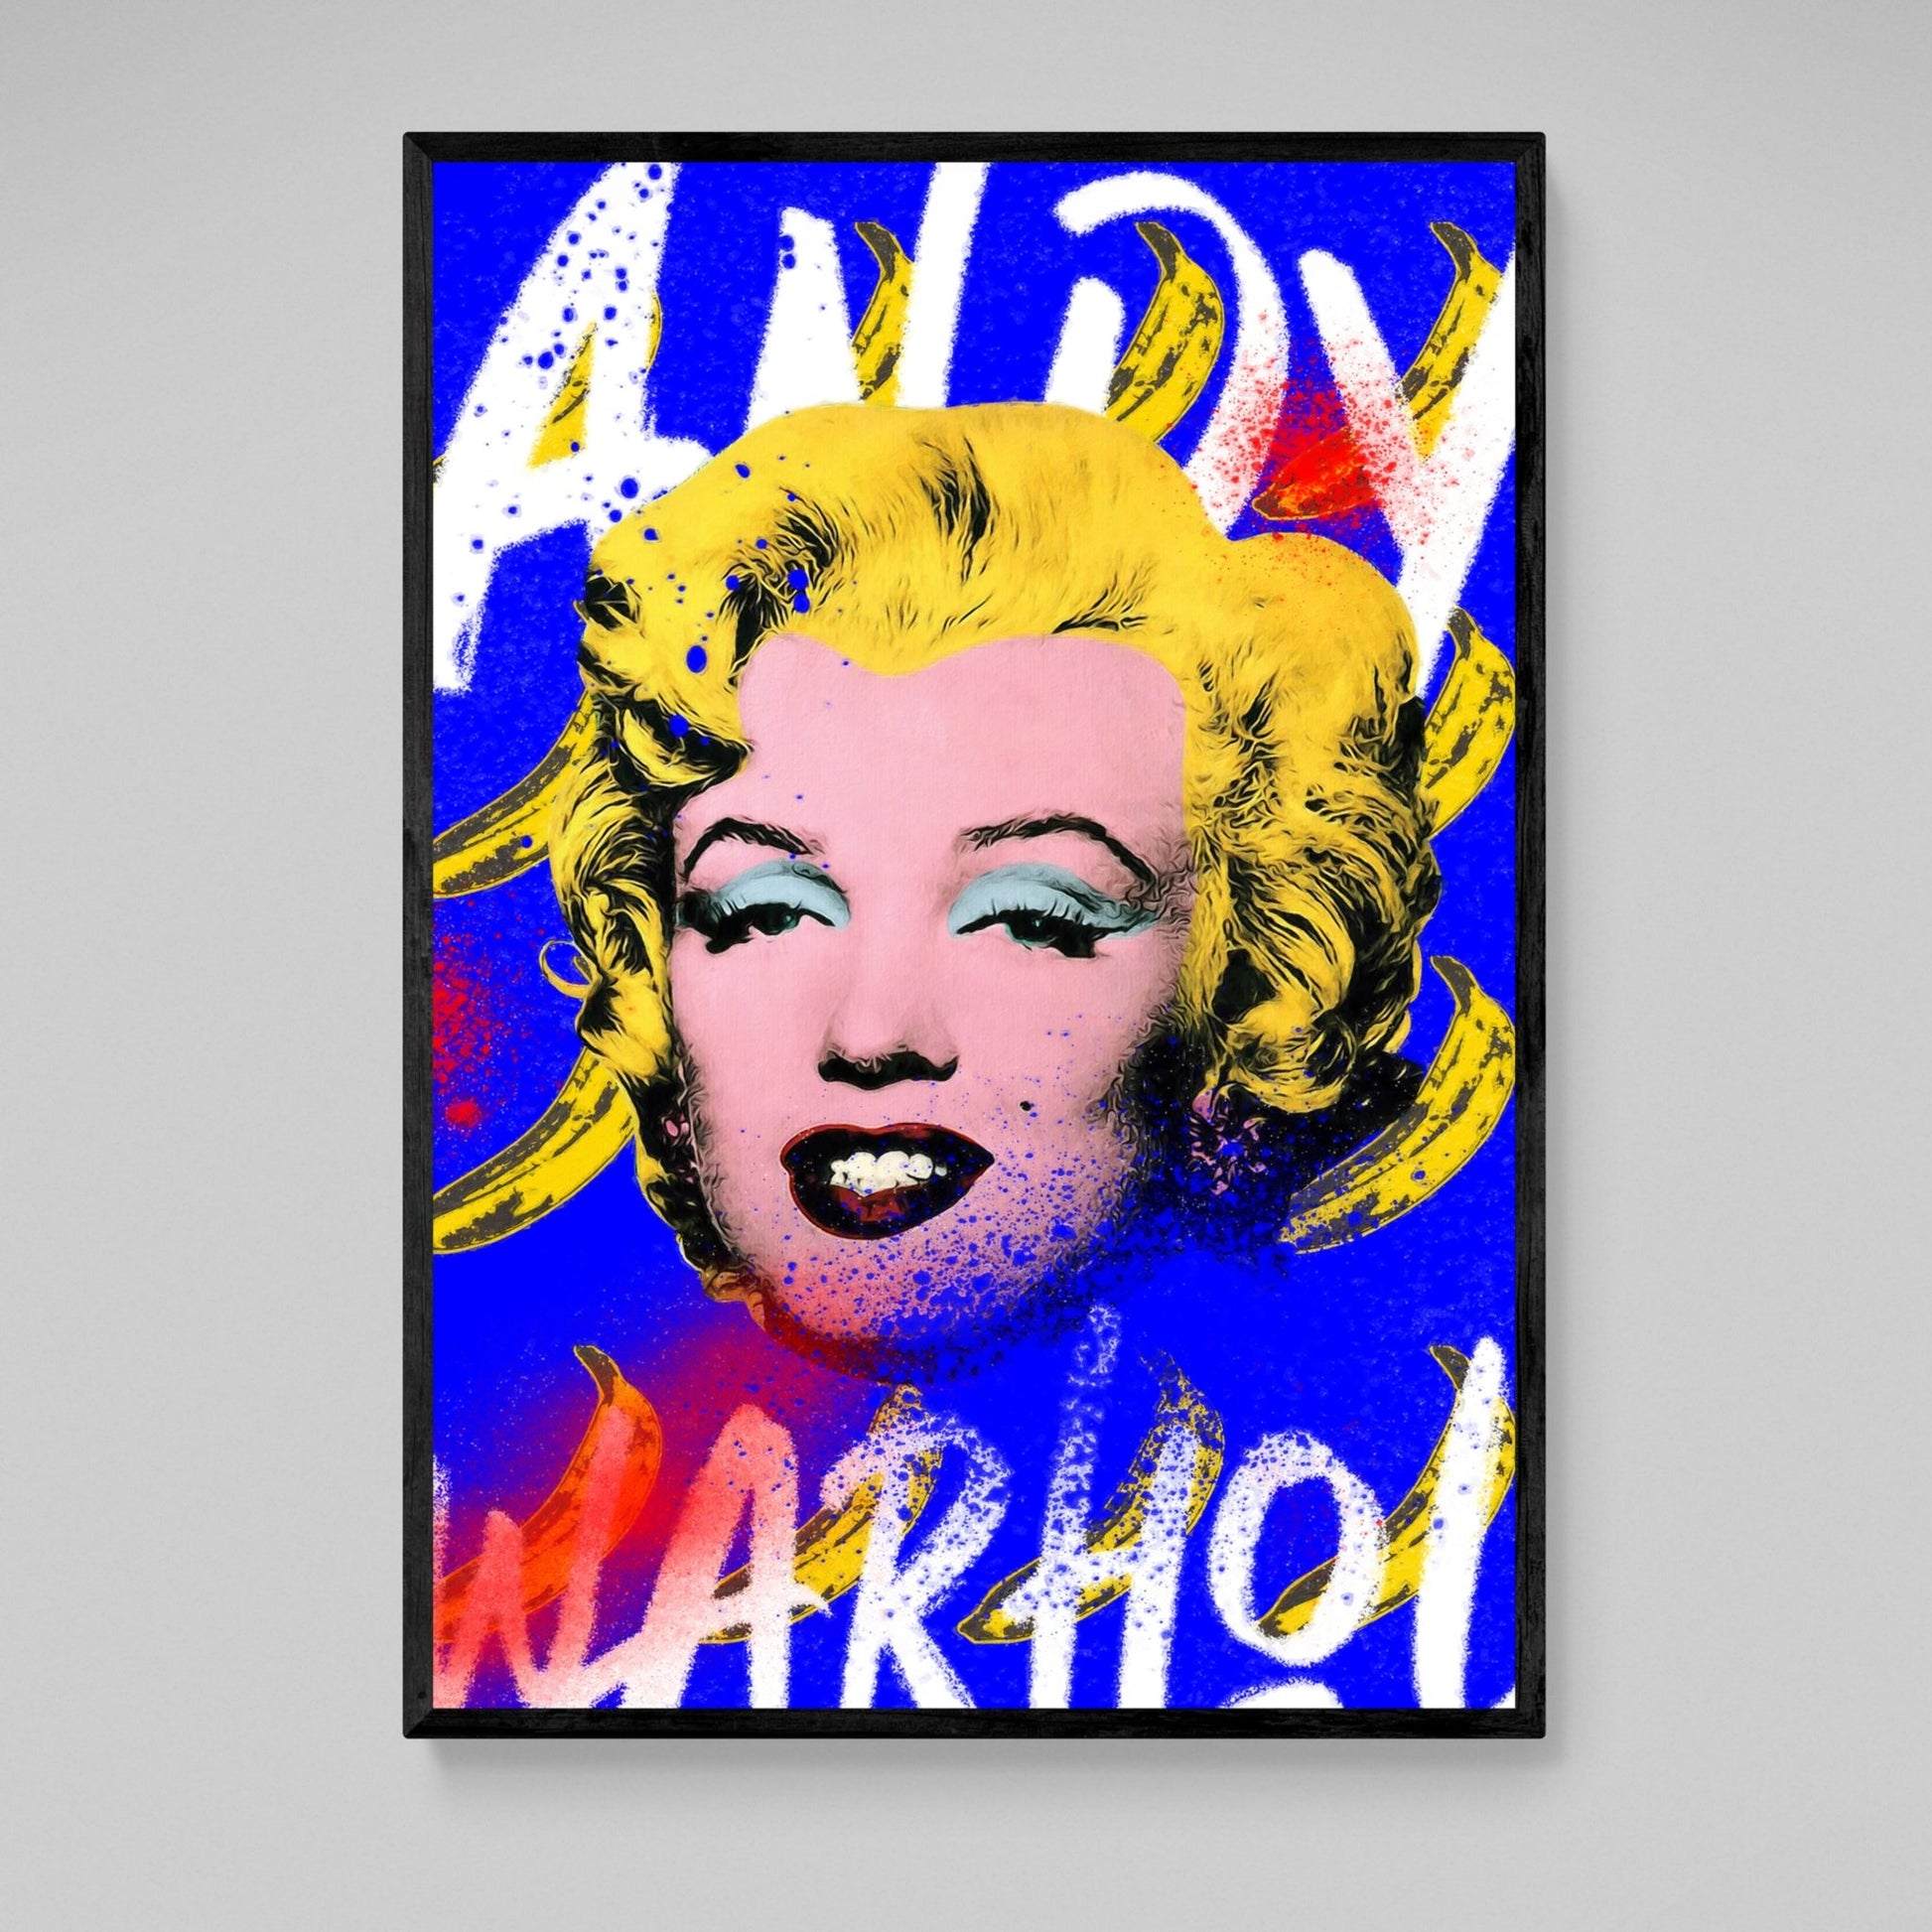 Sold at Auction: Andy Warhol, Original Vintage Tate Gallery Marilyn Monroe Andy  Warhol Poster 1971